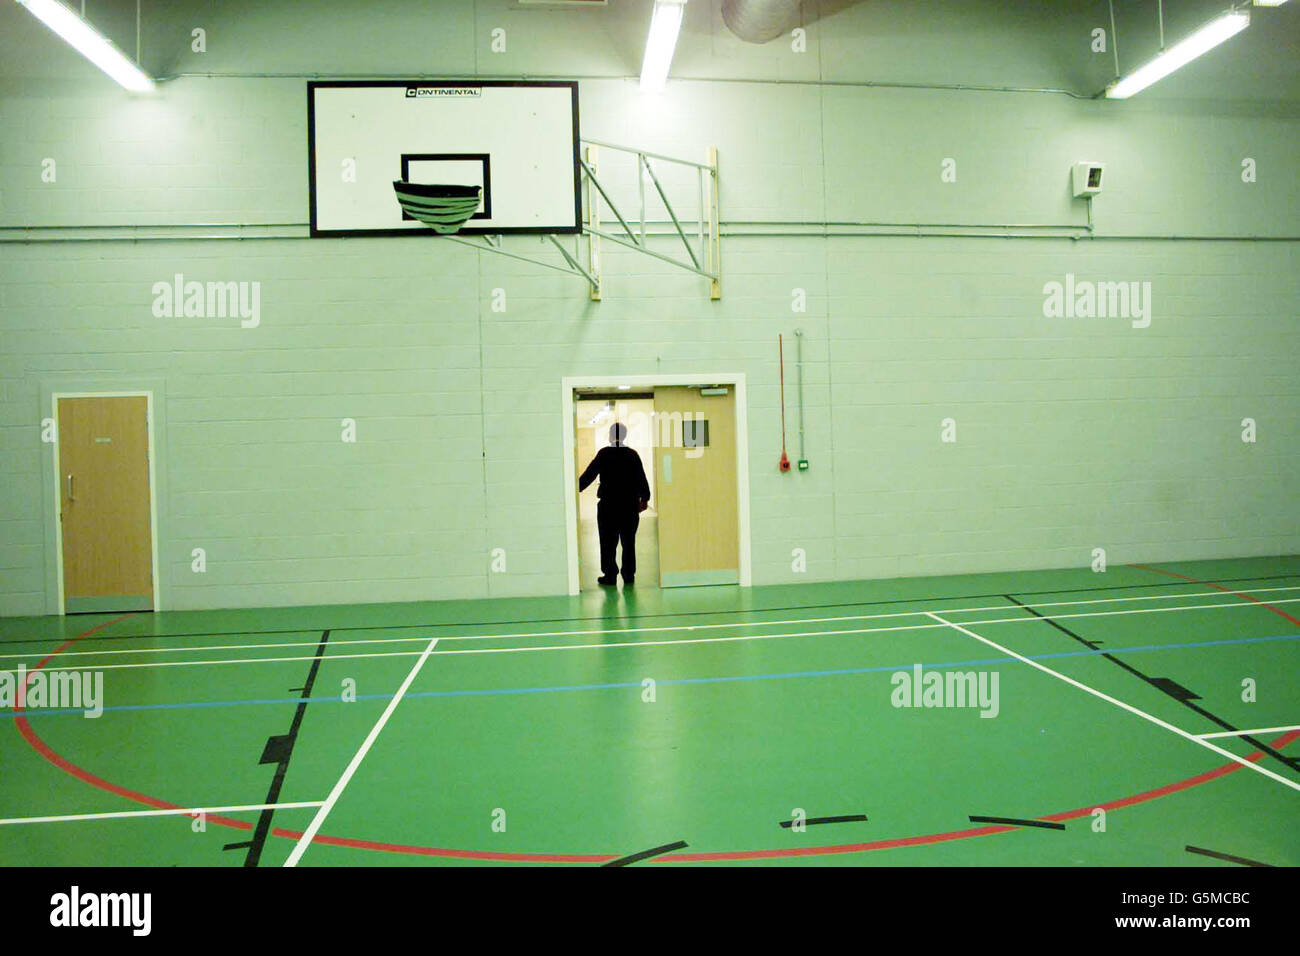 Yarls Wood immigration Removal centre in Clapham near Bedford, Bedfordshire. It will hold 900 immigration detainees and is the largest in the UK detention estate. Yarls Wood will be the largest Immigration removal centre in Europe. Inside the Centre sports hall. Stock Photo